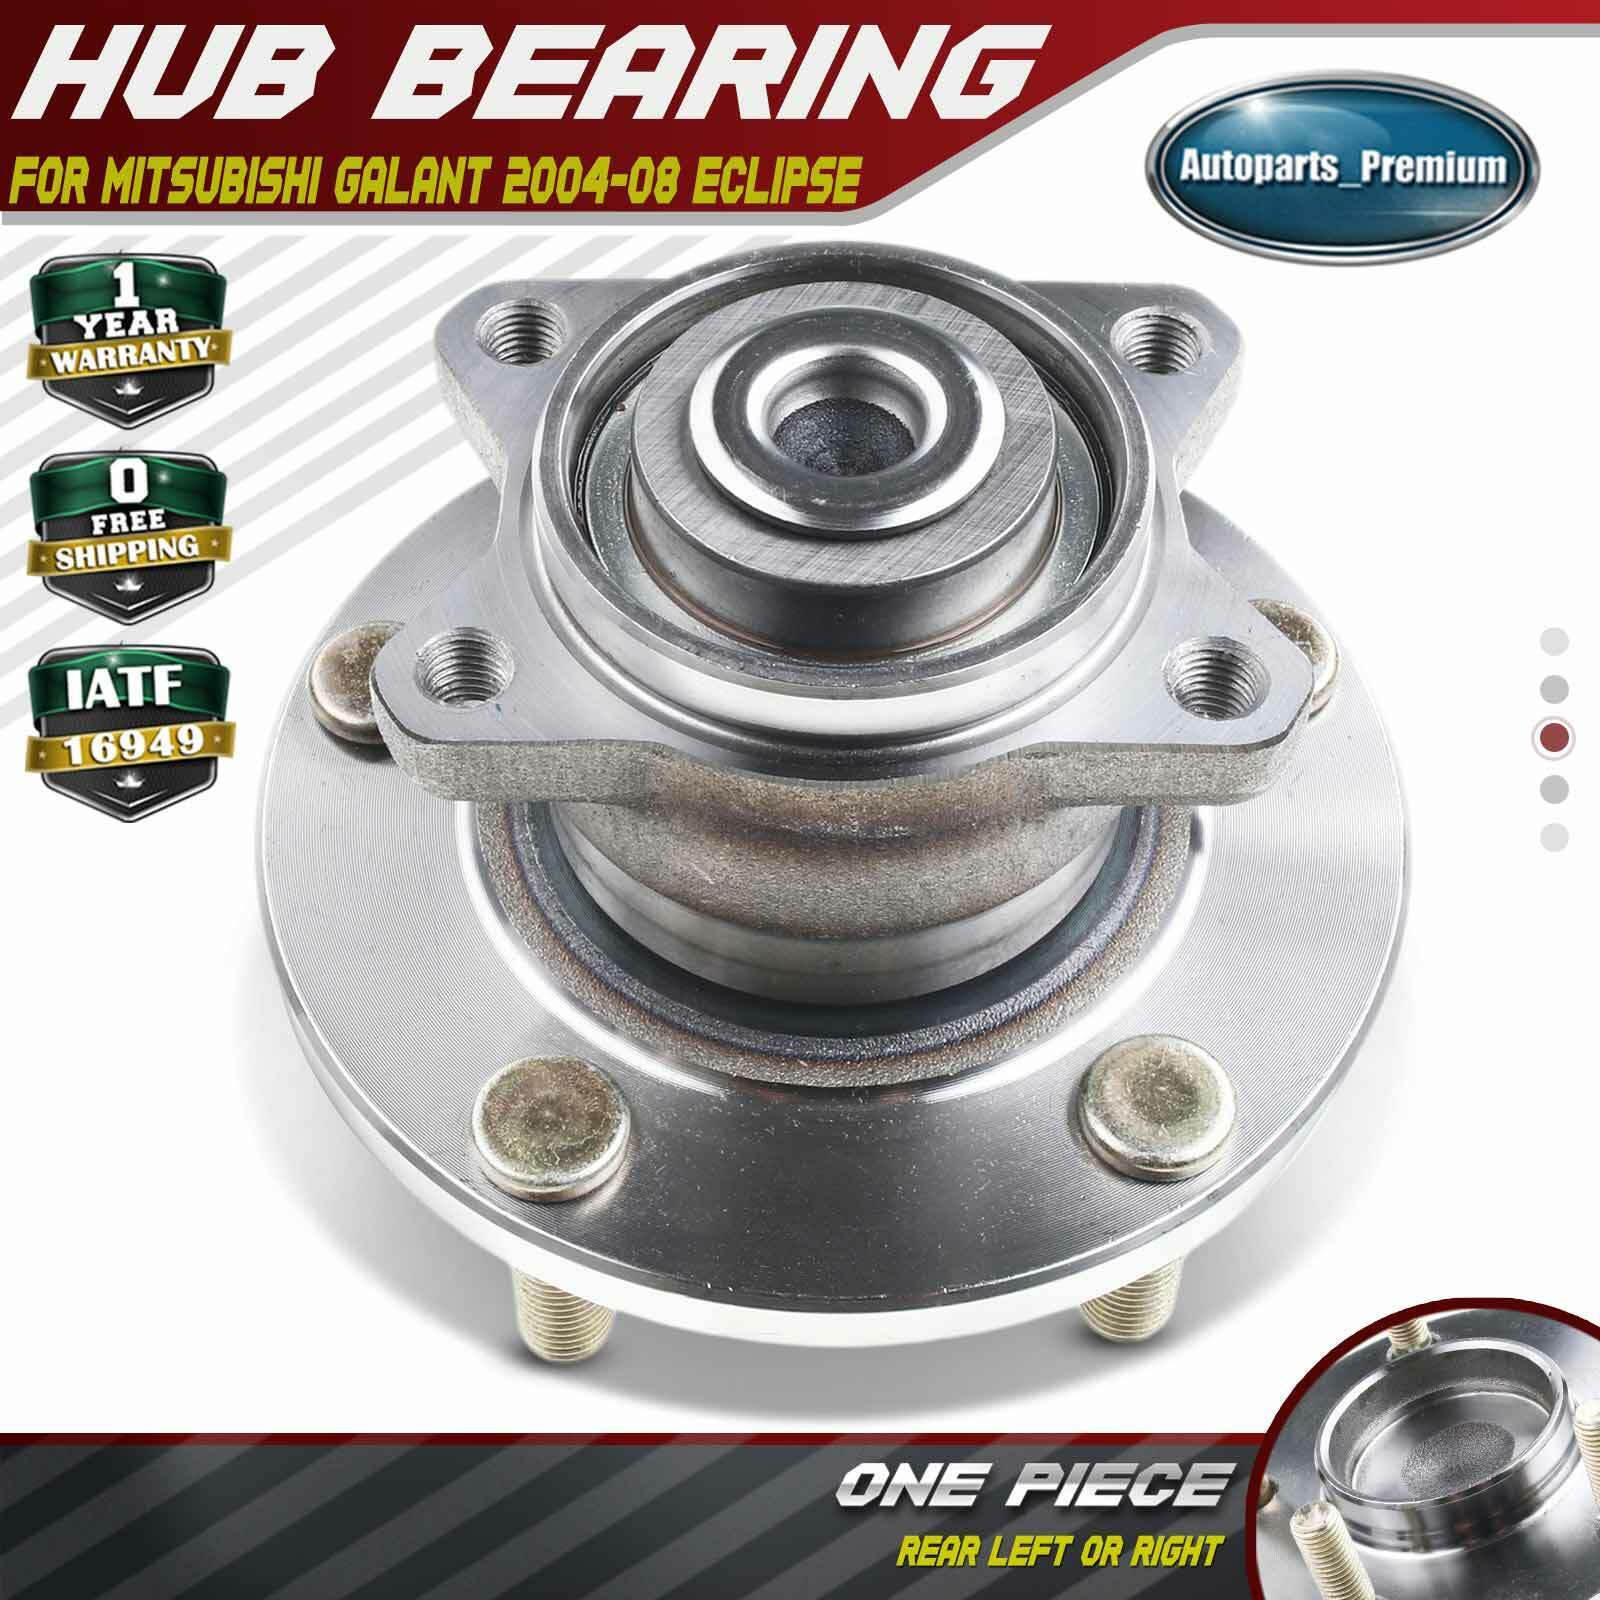 Rear LH or RH Wheel Hub & Bearing Assembly for Mitsubishi Galant 2004-08 Eclipse